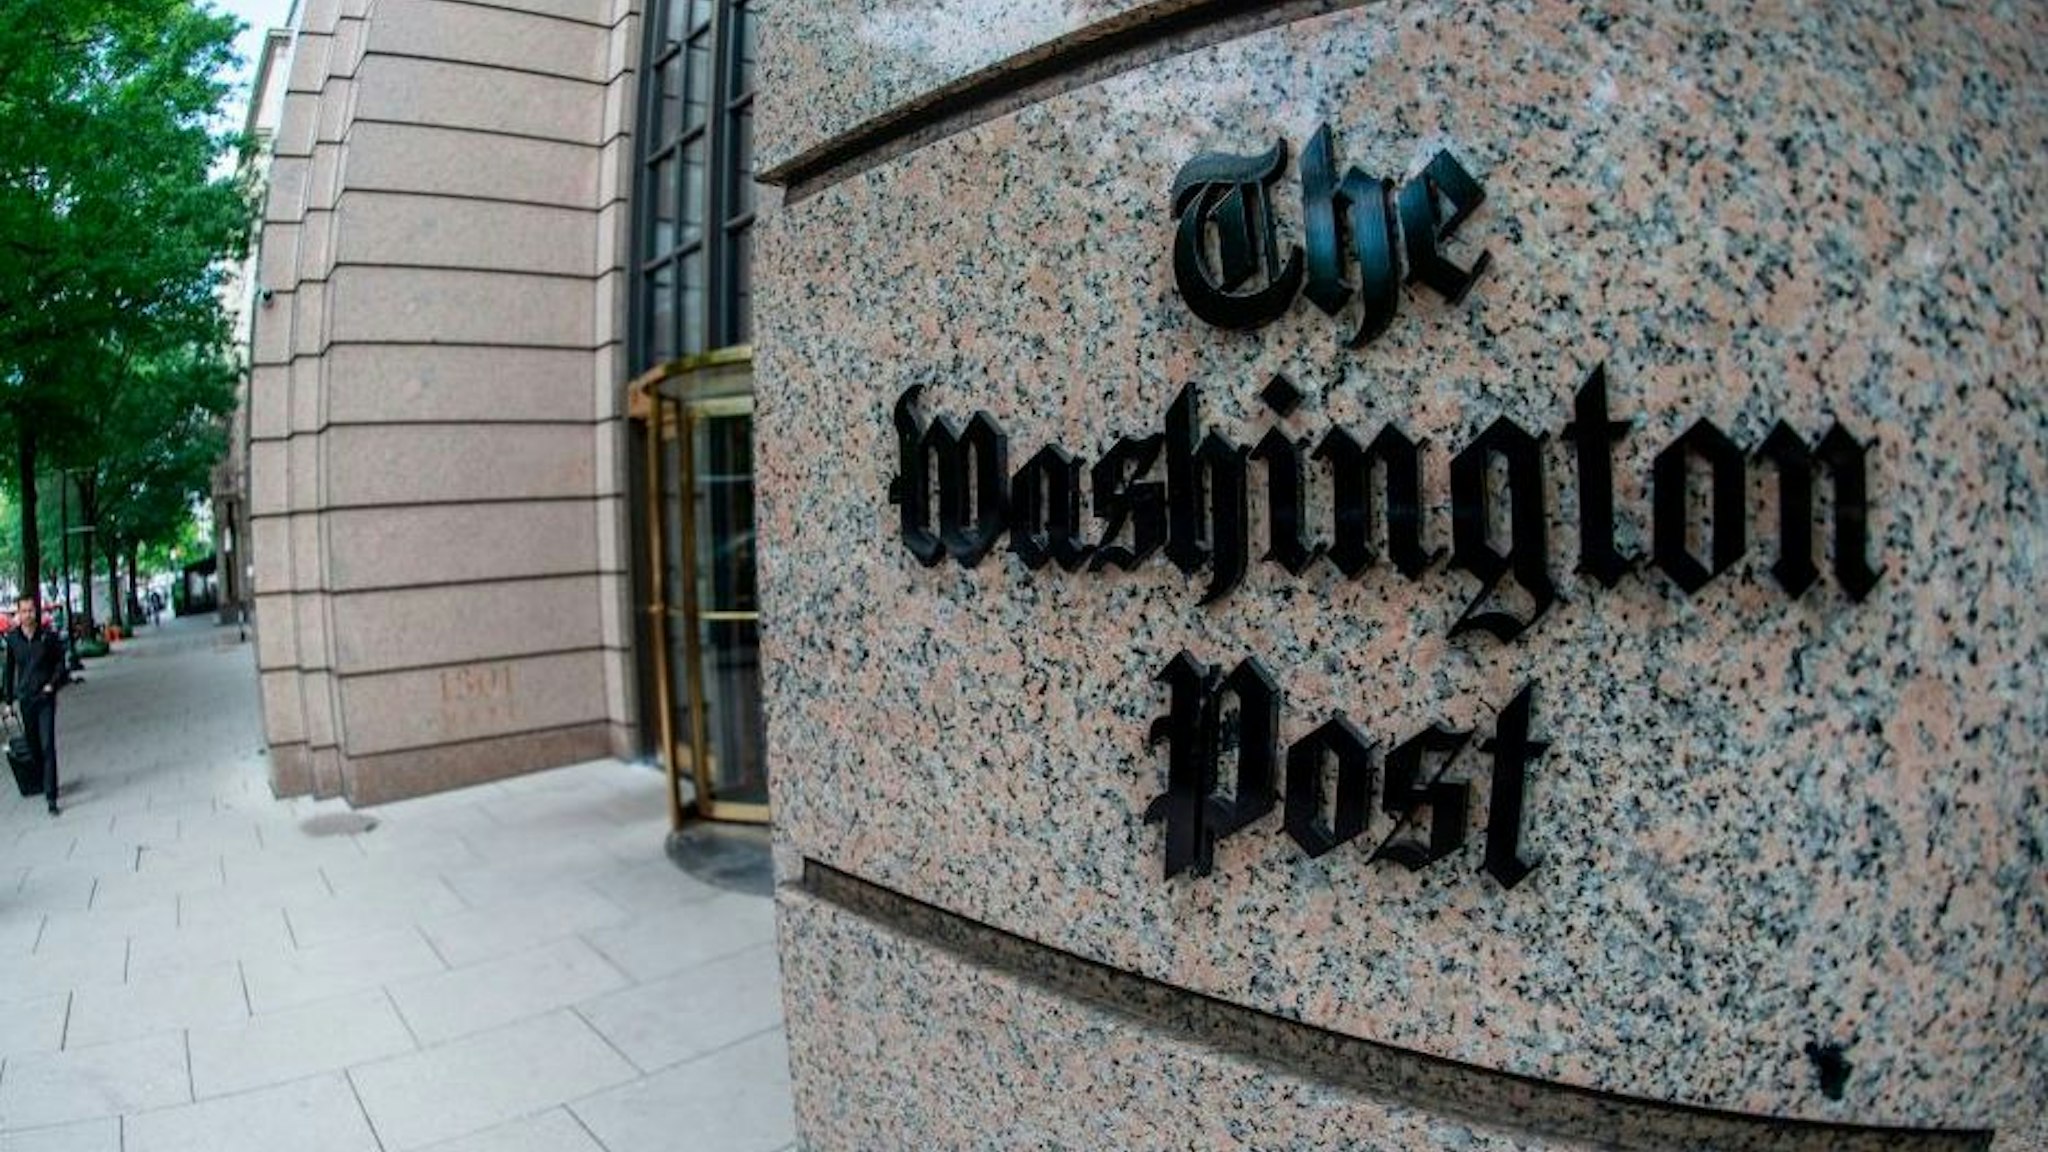 The building of the Washington Post newspaper headquarter is seen on K Street in Washington DC on May 16, 2019.